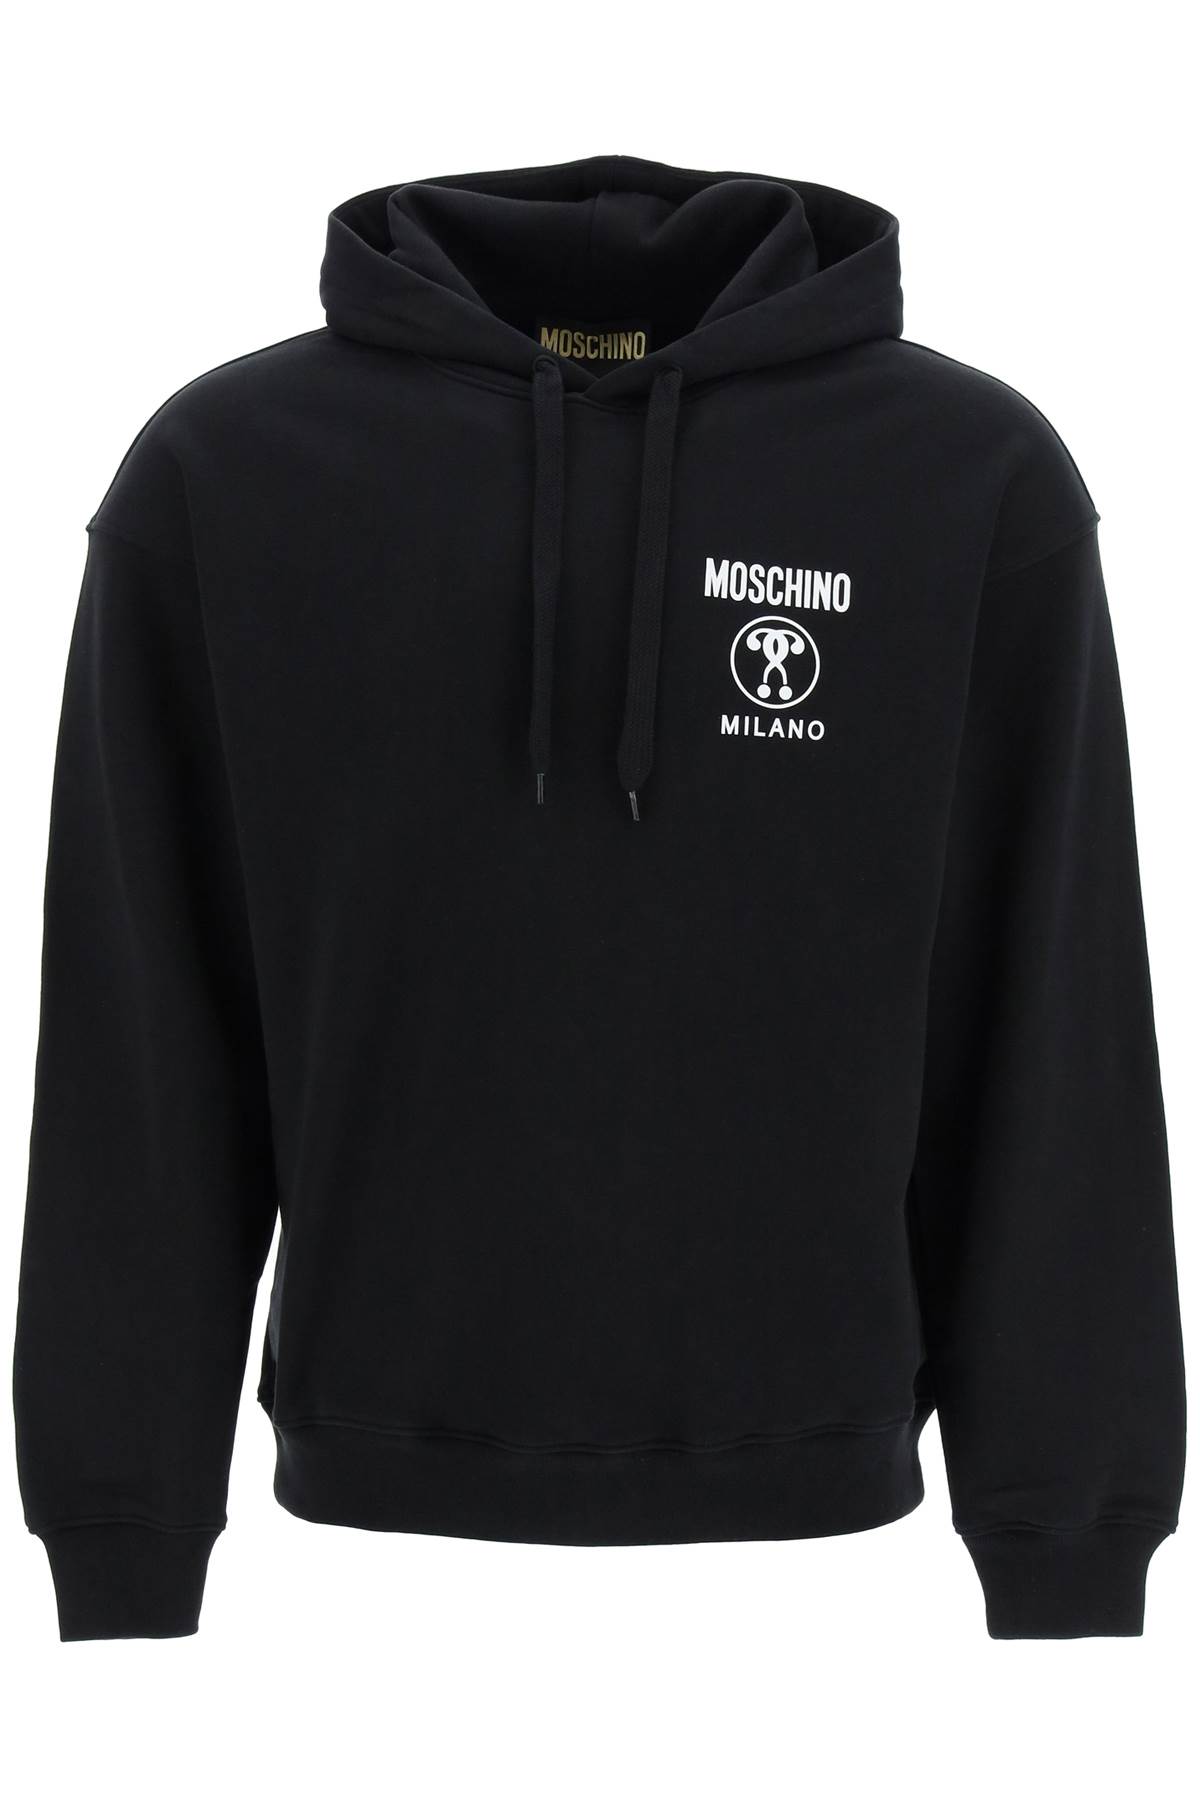 Moschino double Question Mark Hoodie